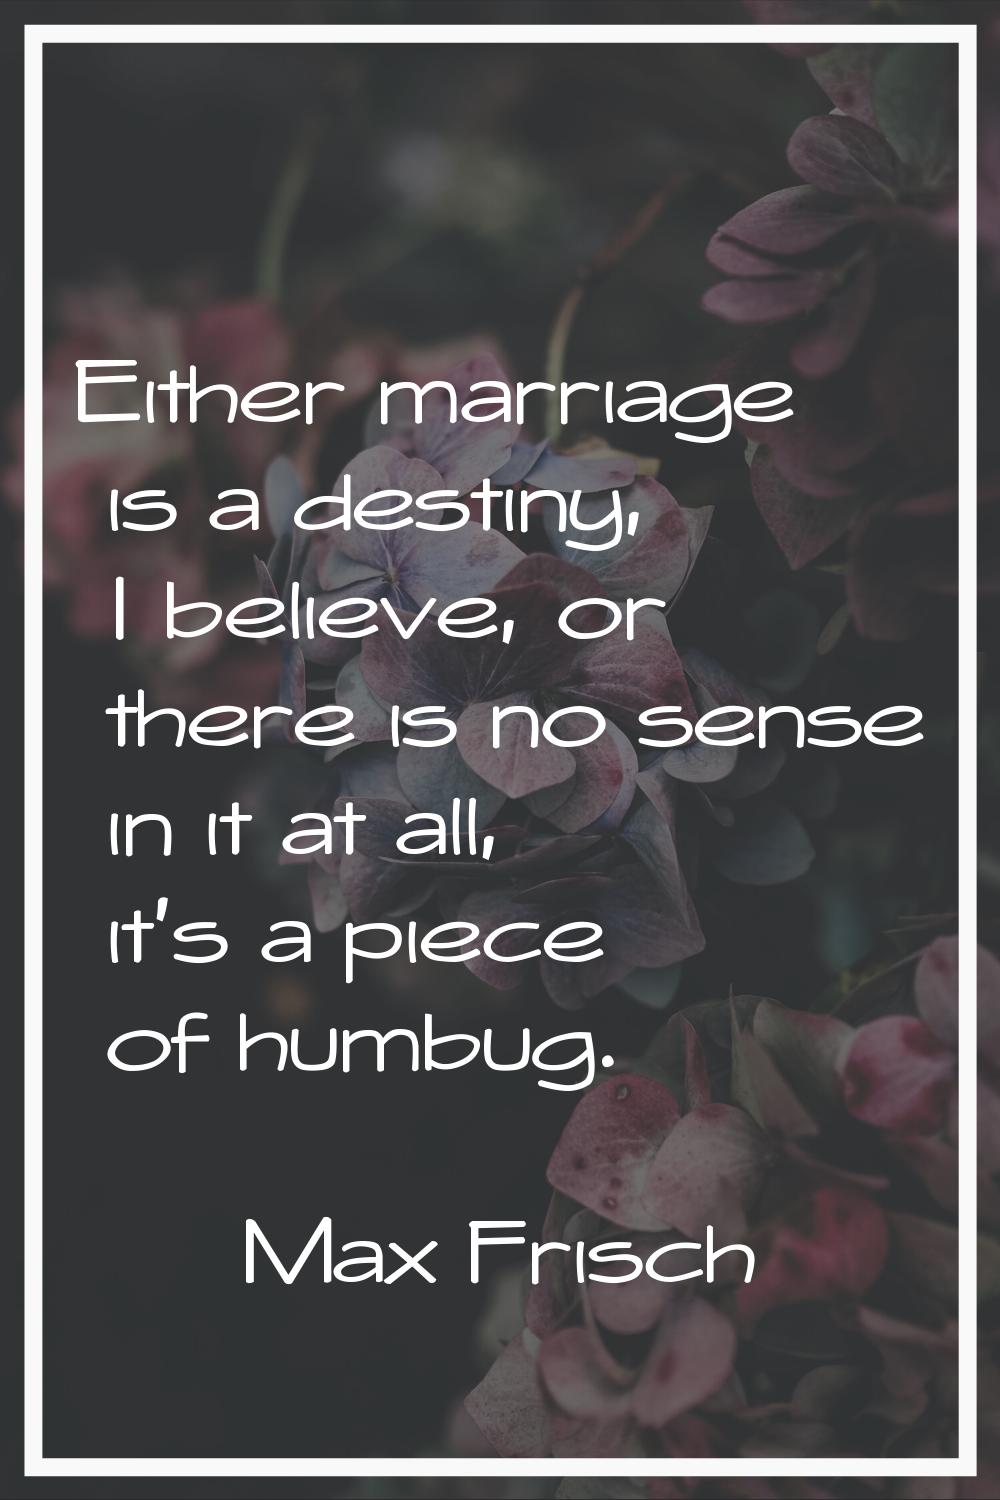 Either marriage is a destiny, I believe, or there is no sense in it at all, it's a piece of humbug.